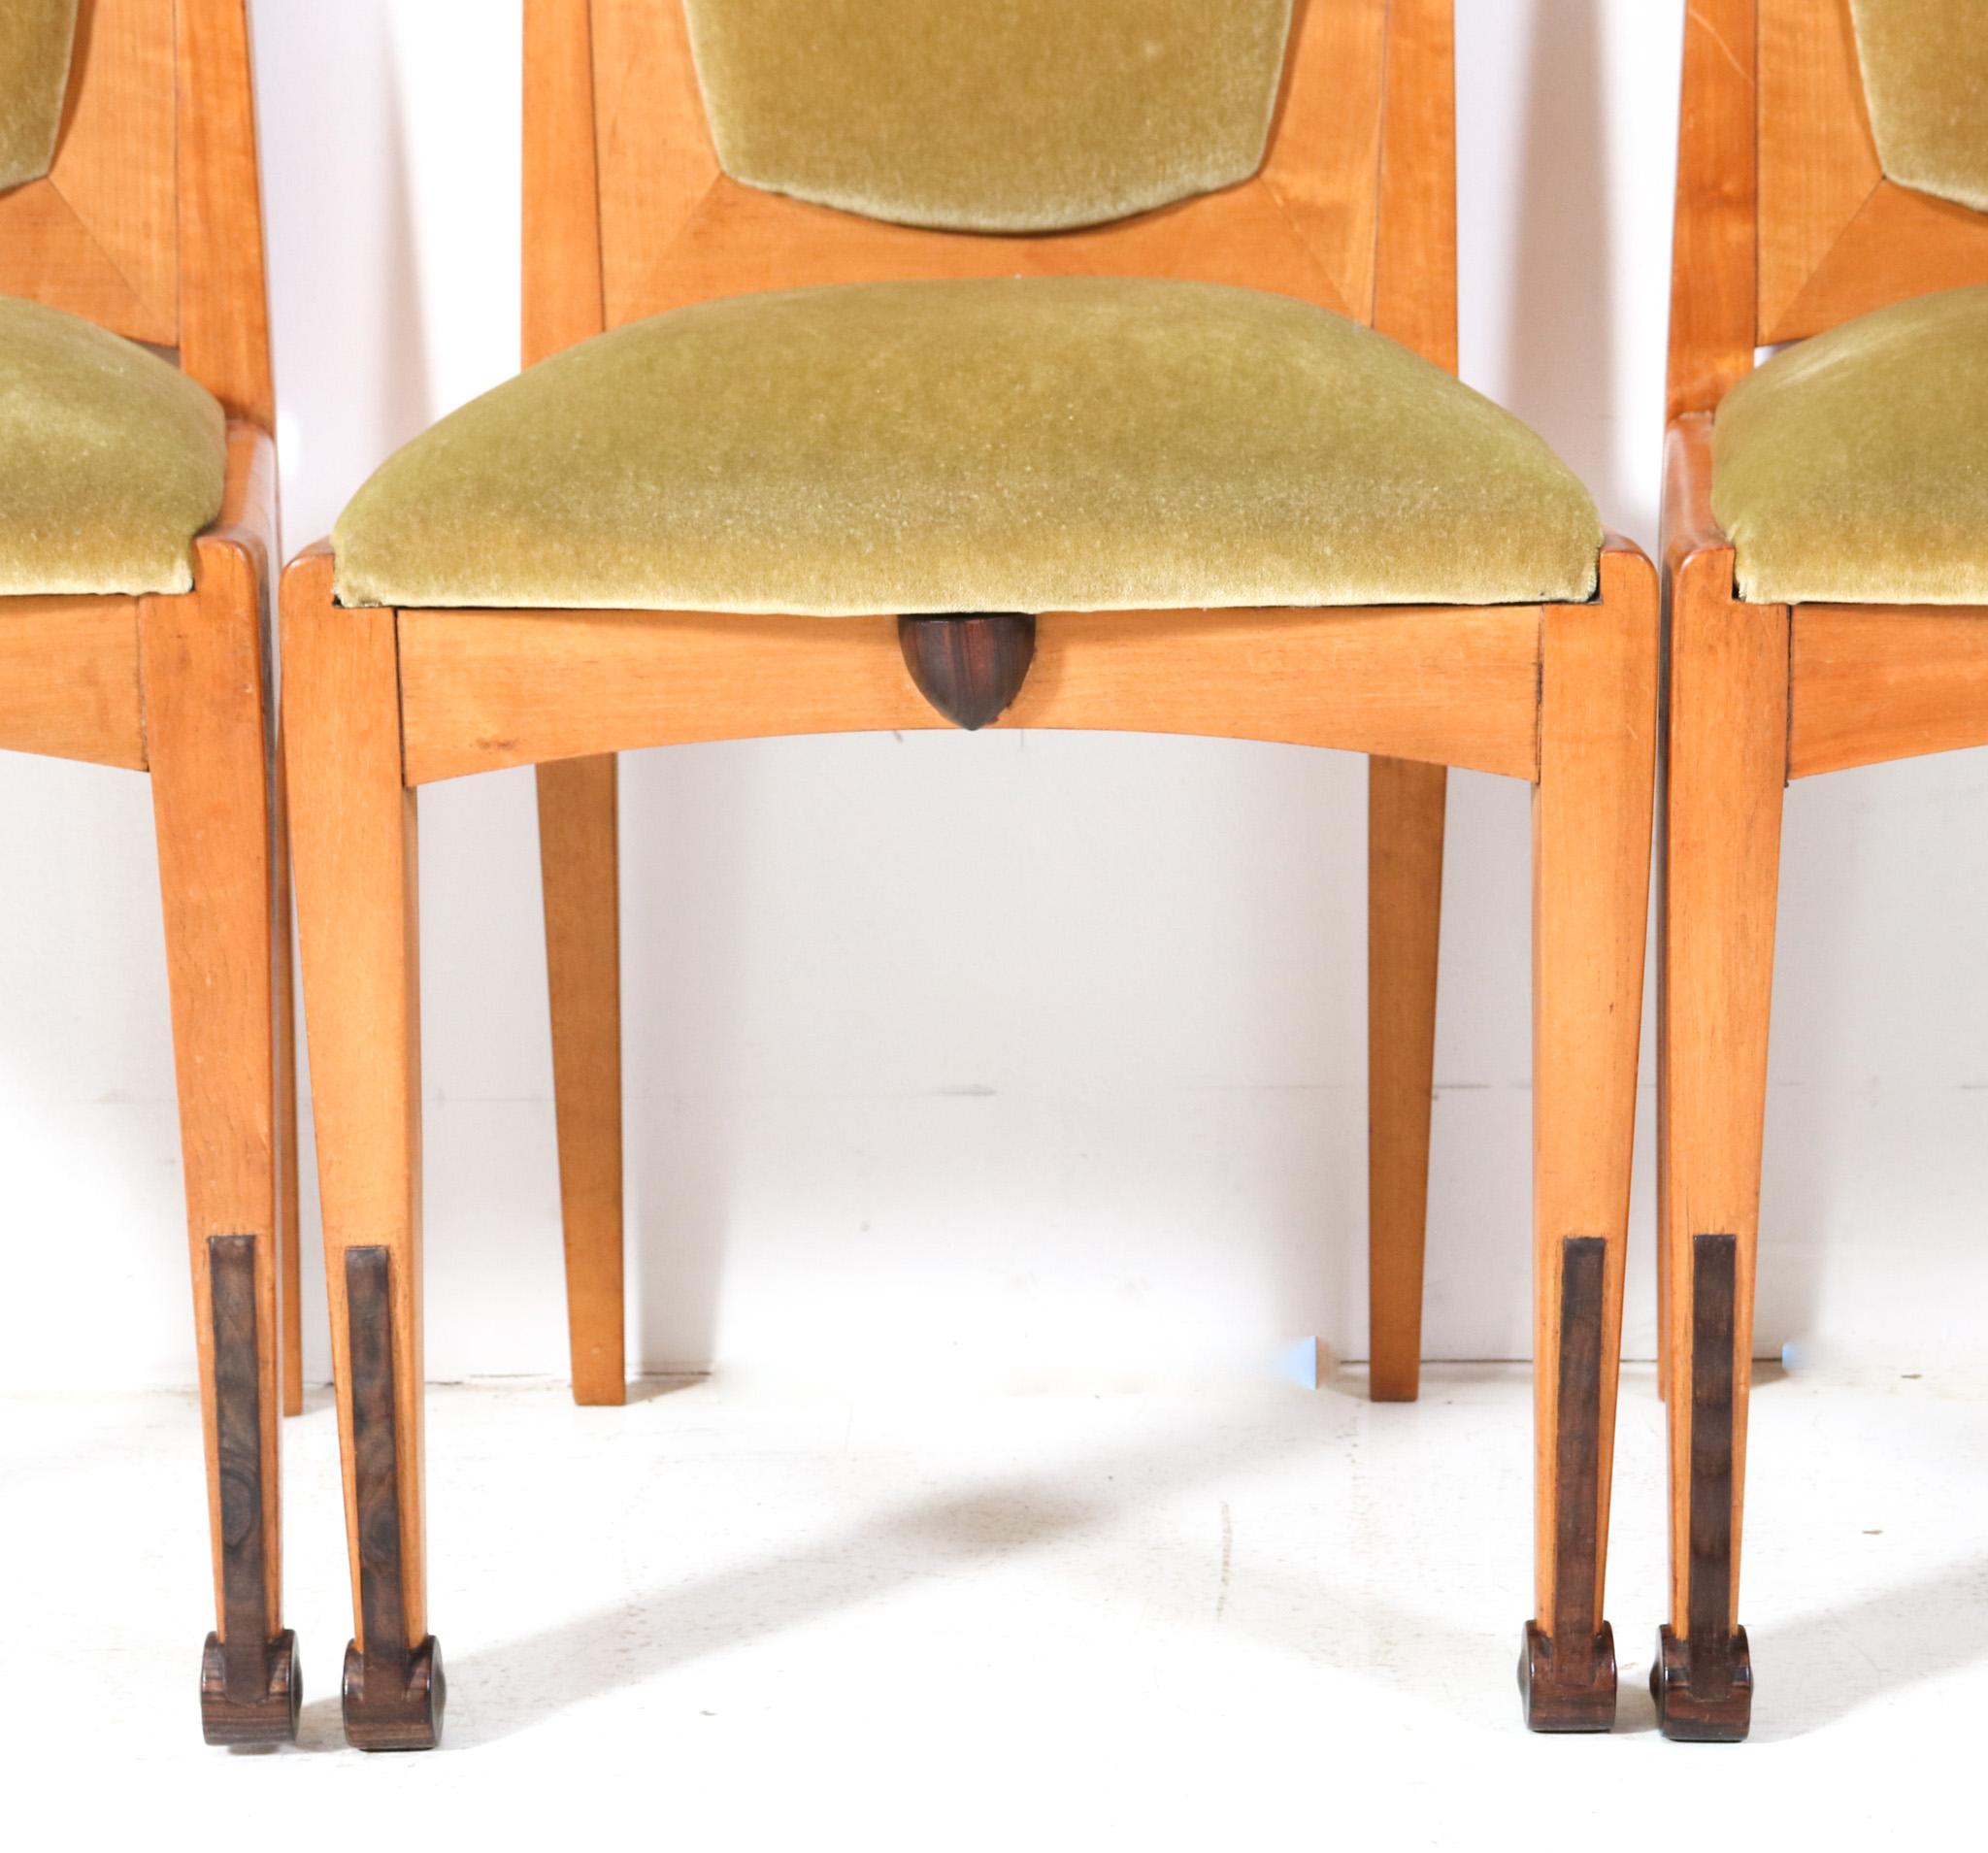 Set of Six Art Deco Amsterdamse School Dining Room Chairs by J.J. Zijfers, 1920s For Sale 6